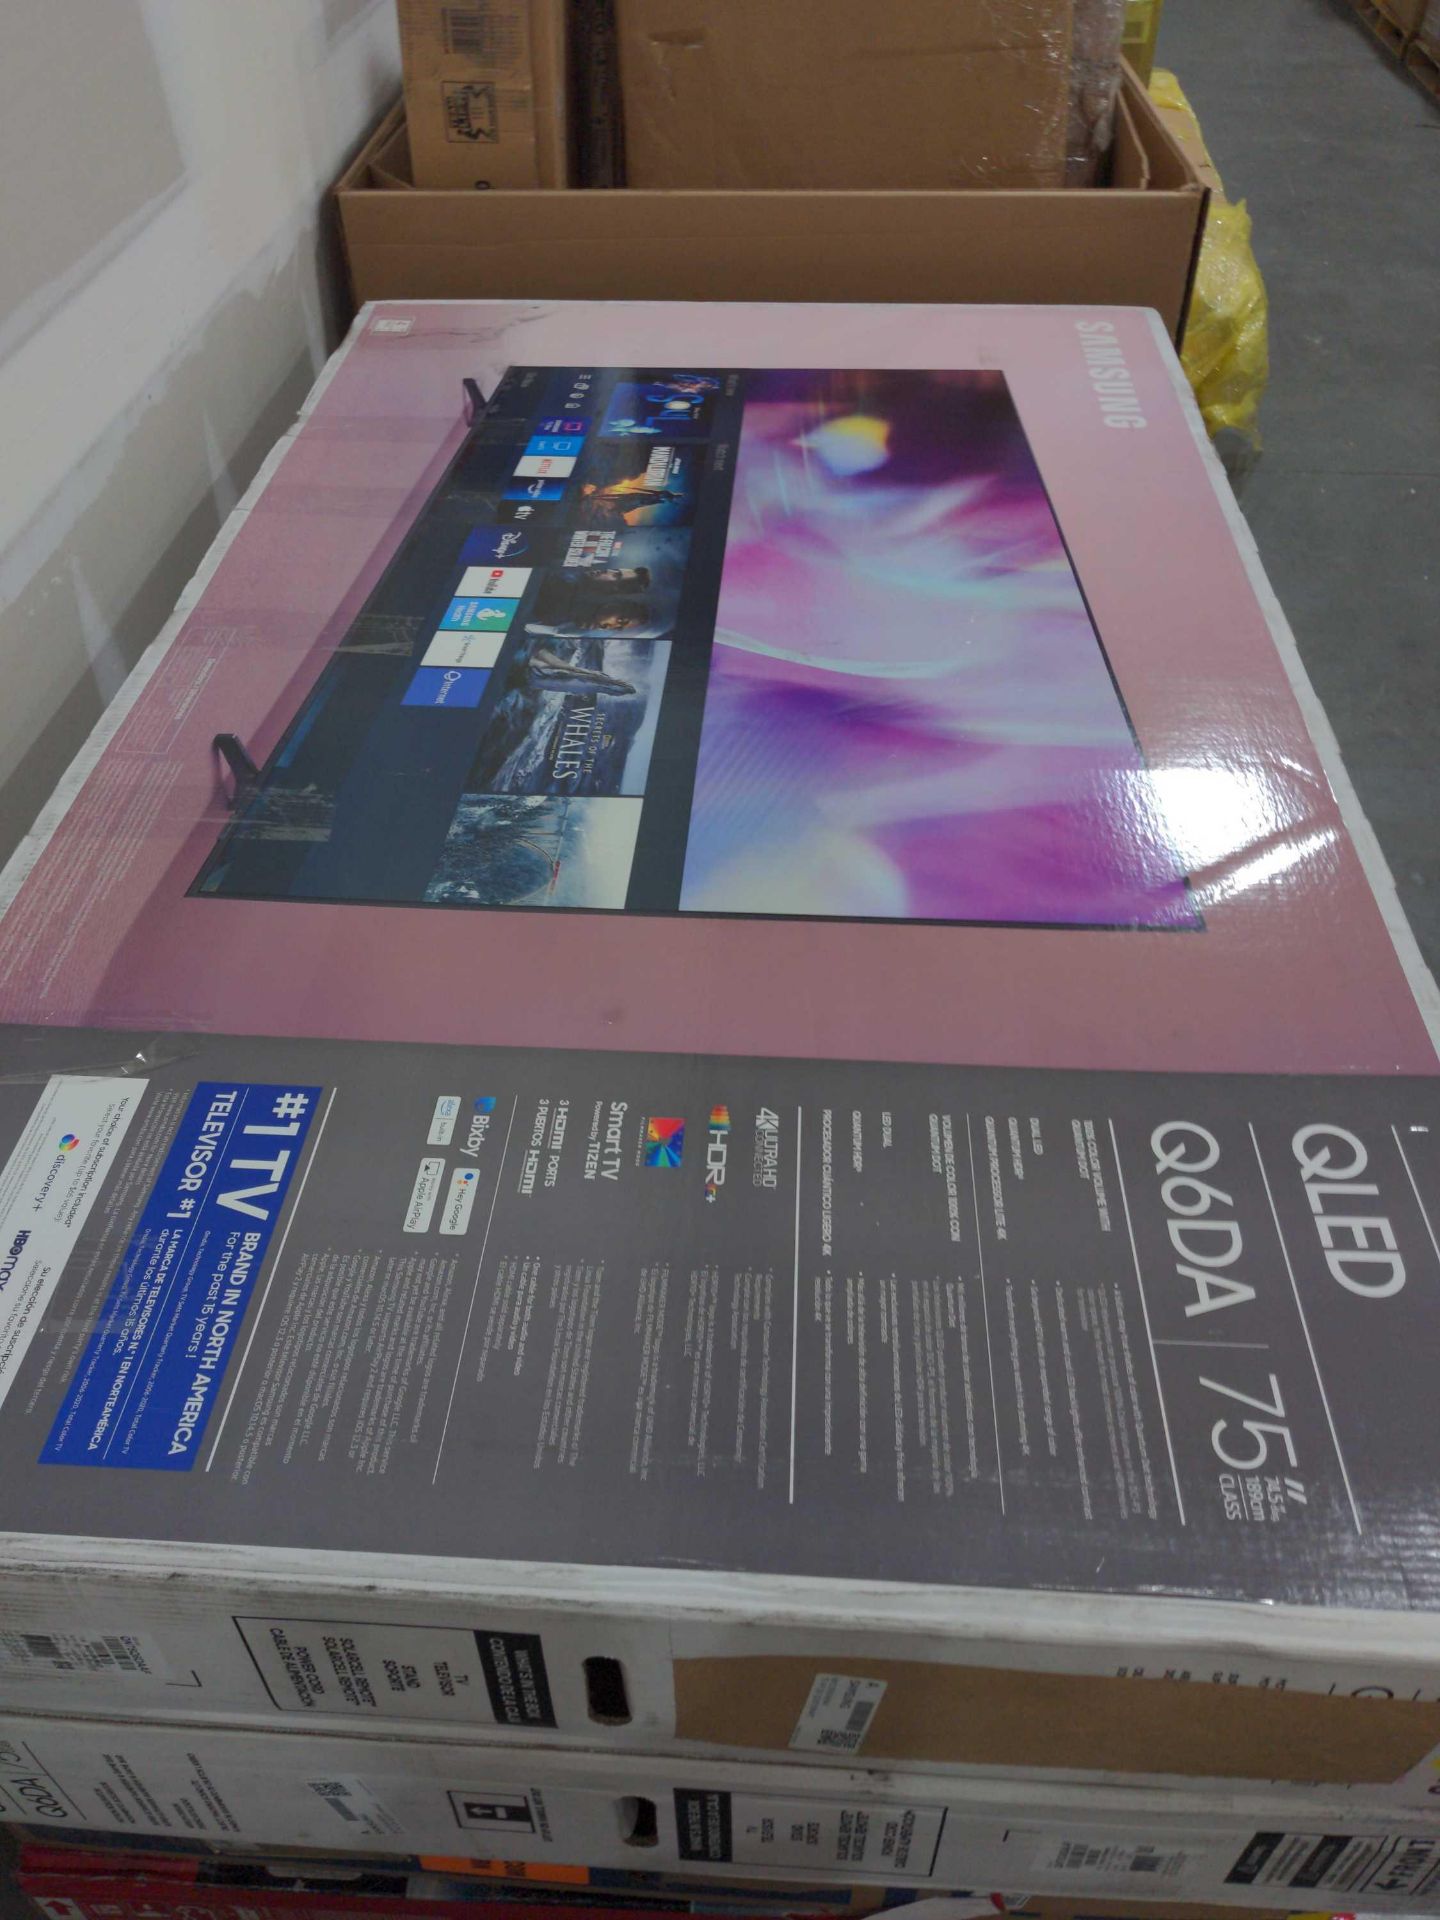 Samsung QLED 75" TV (grade a working & tested) Please ask for employee assistance to help with the T - Image 3 of 3